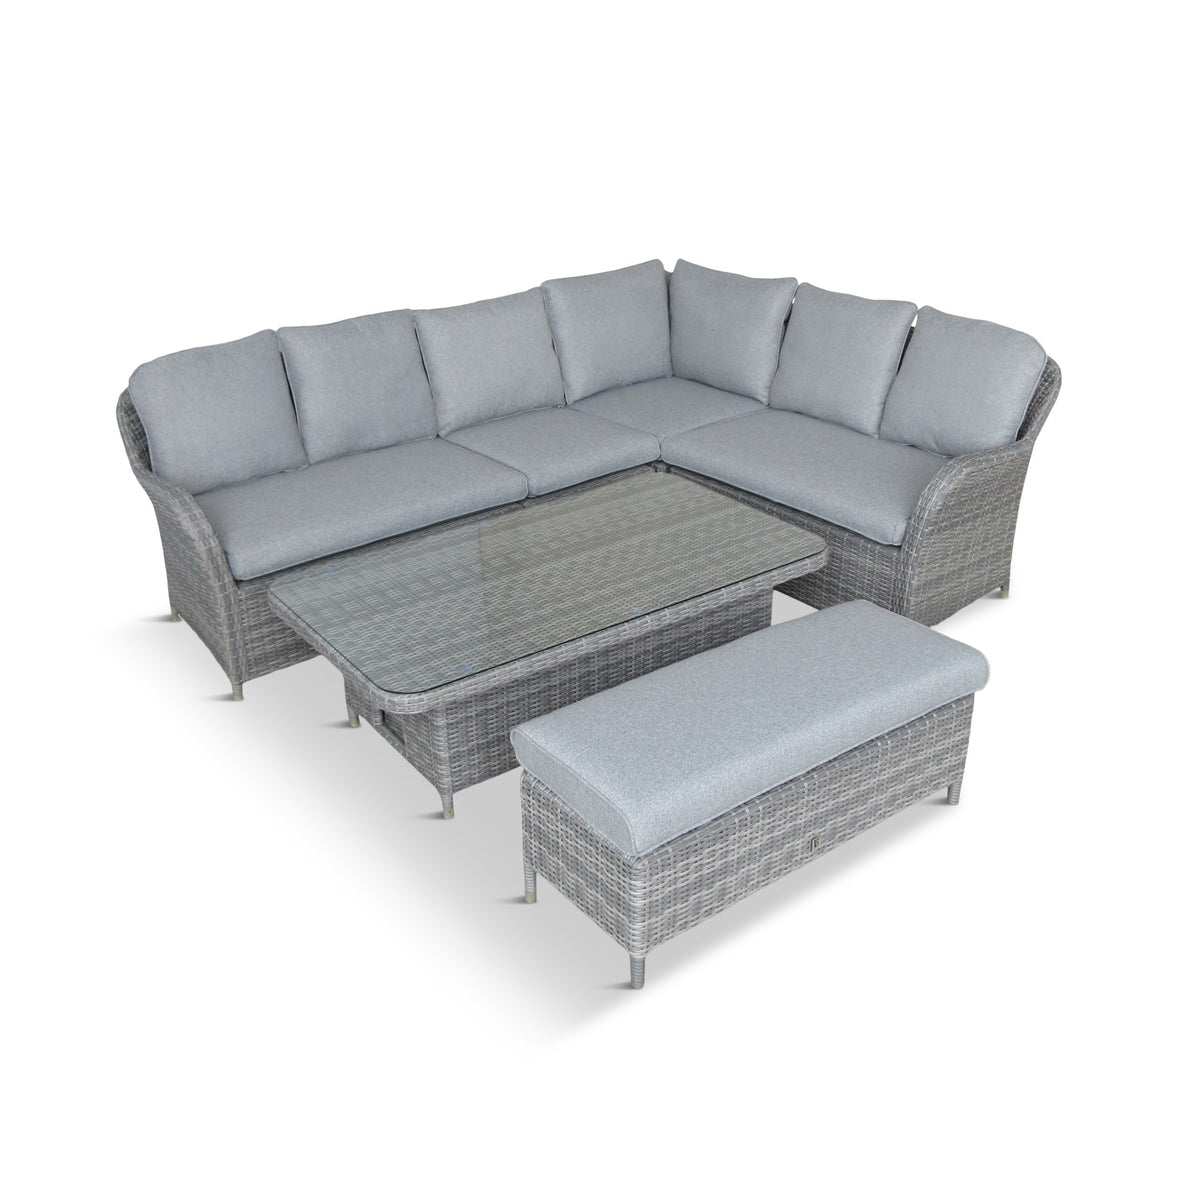 LG Monte Carlo Stone Modular Sofa Set With Height Adjustable Table and Reclining Corner